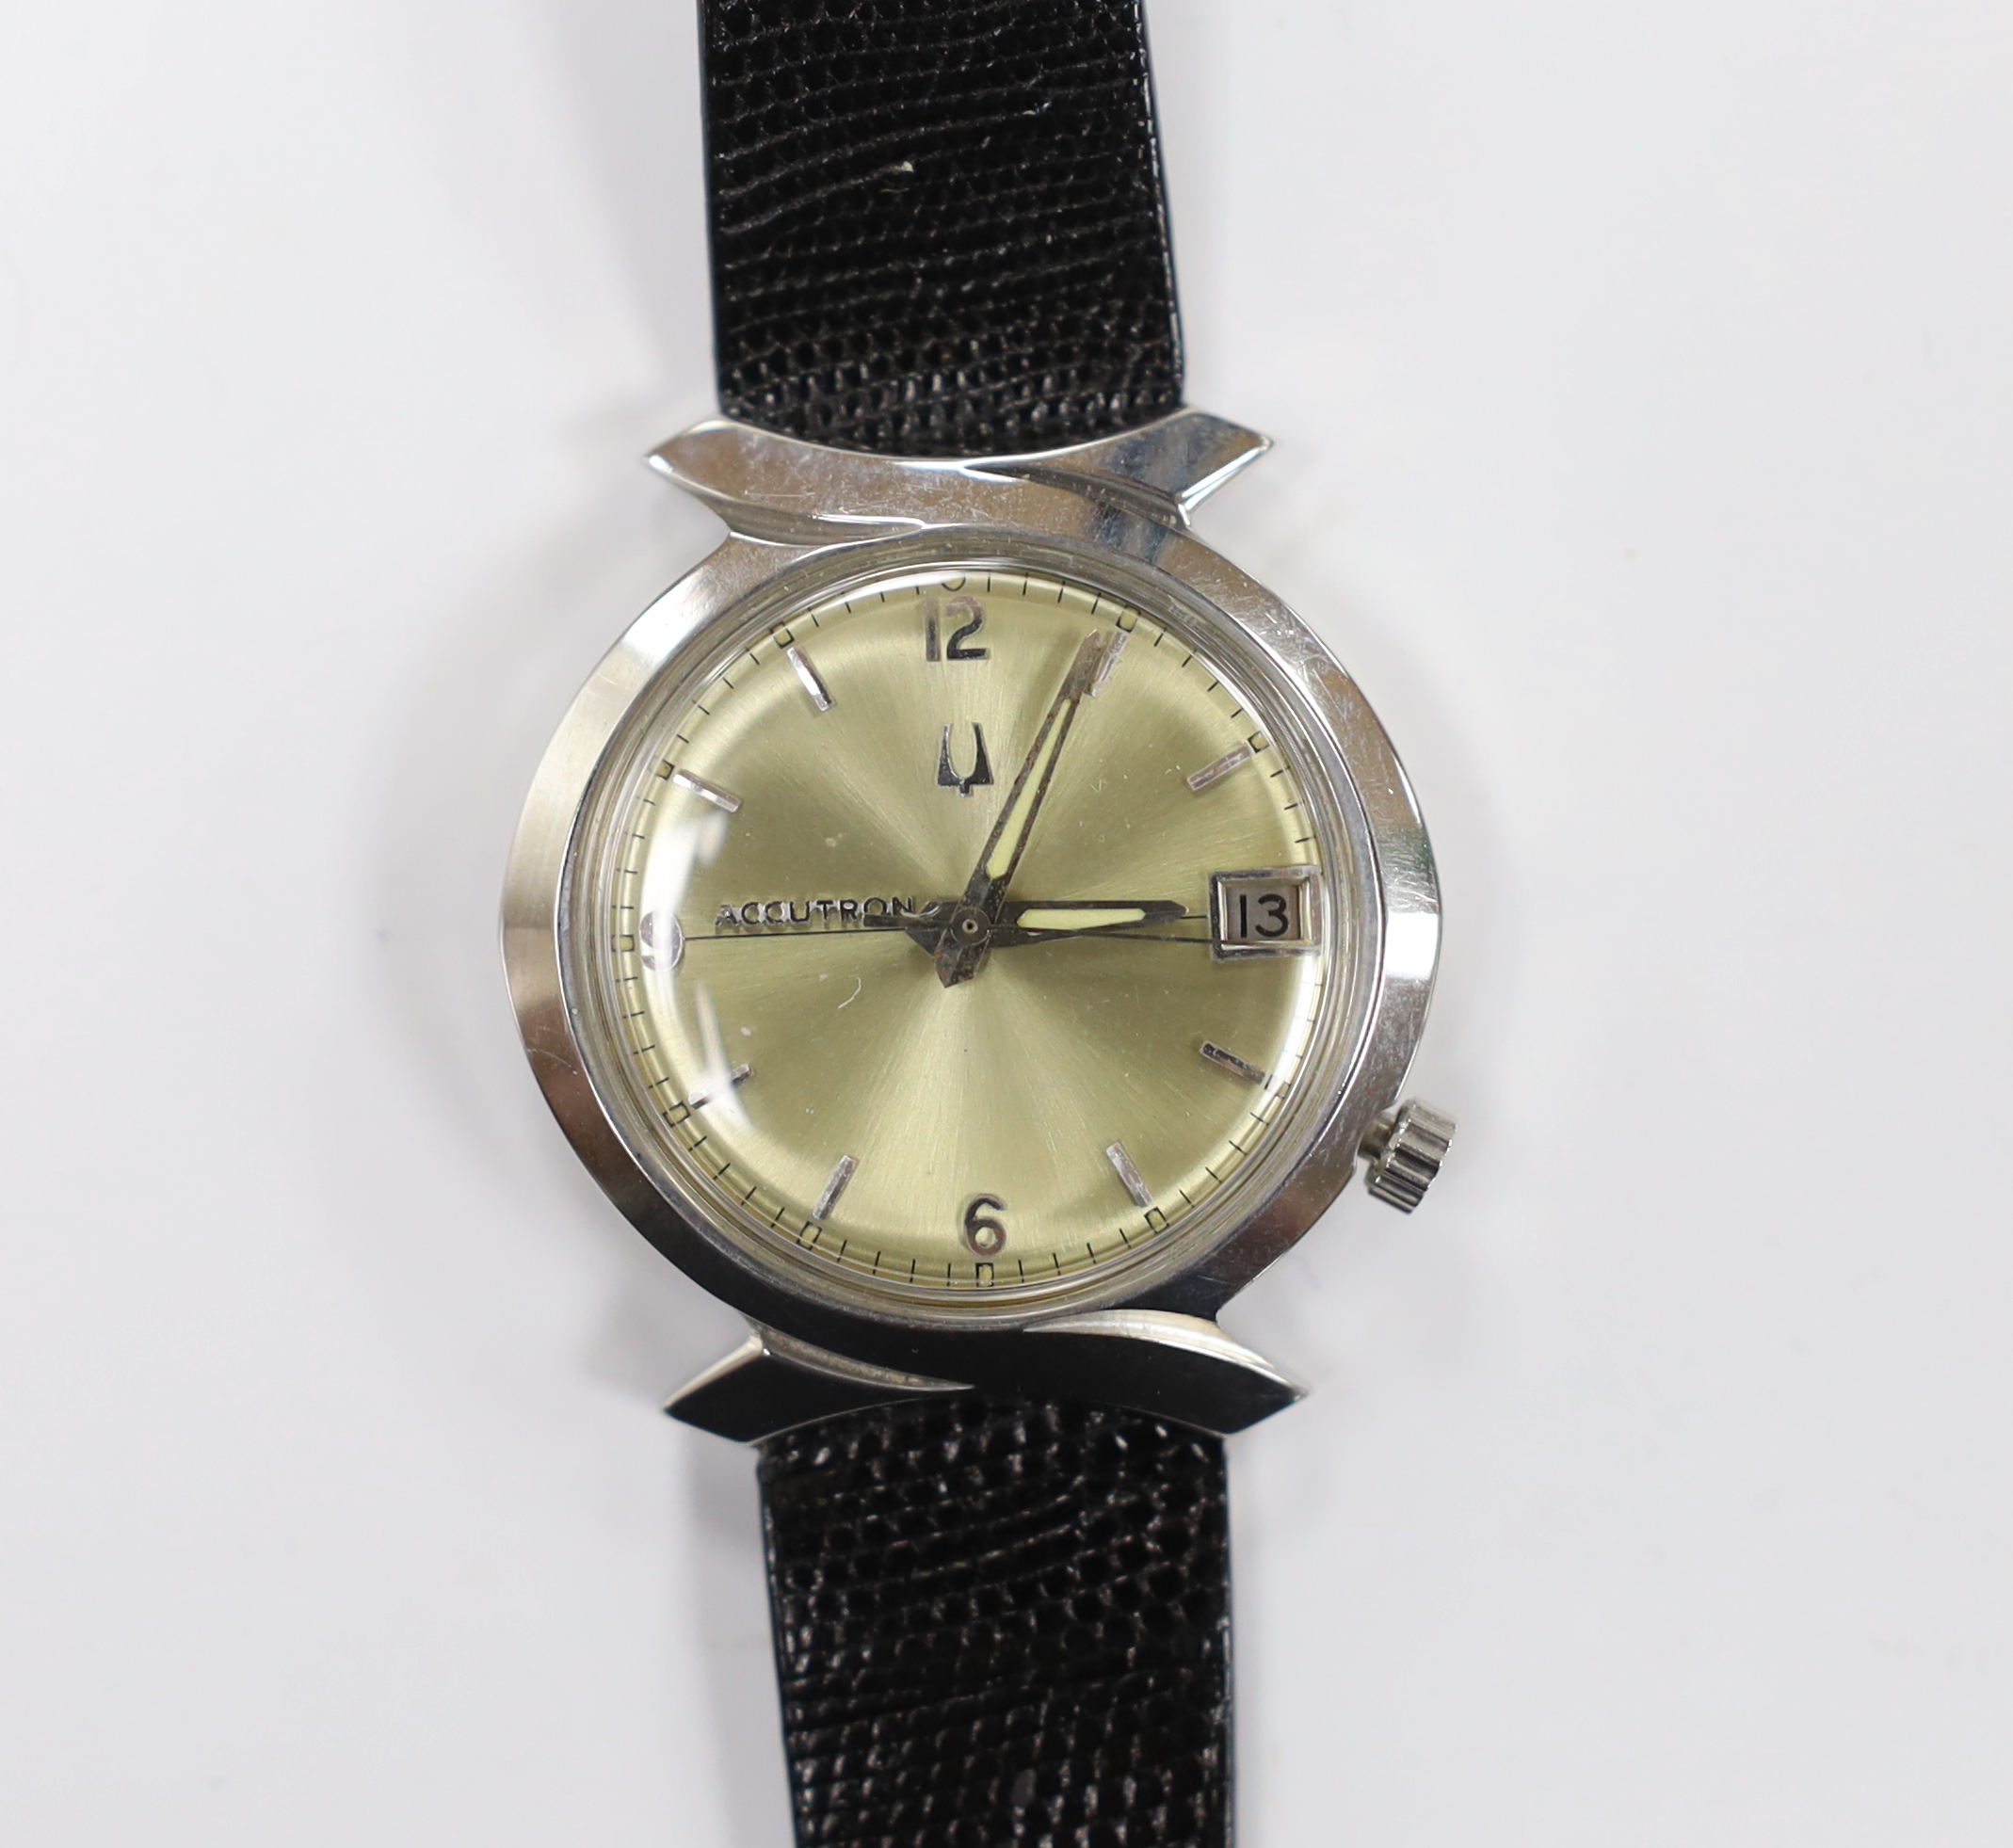 A gentleman's stainless steel Bulova Accutron wrist watch, with pale yellow dial, on Accutron strap, case diameter 36mm.